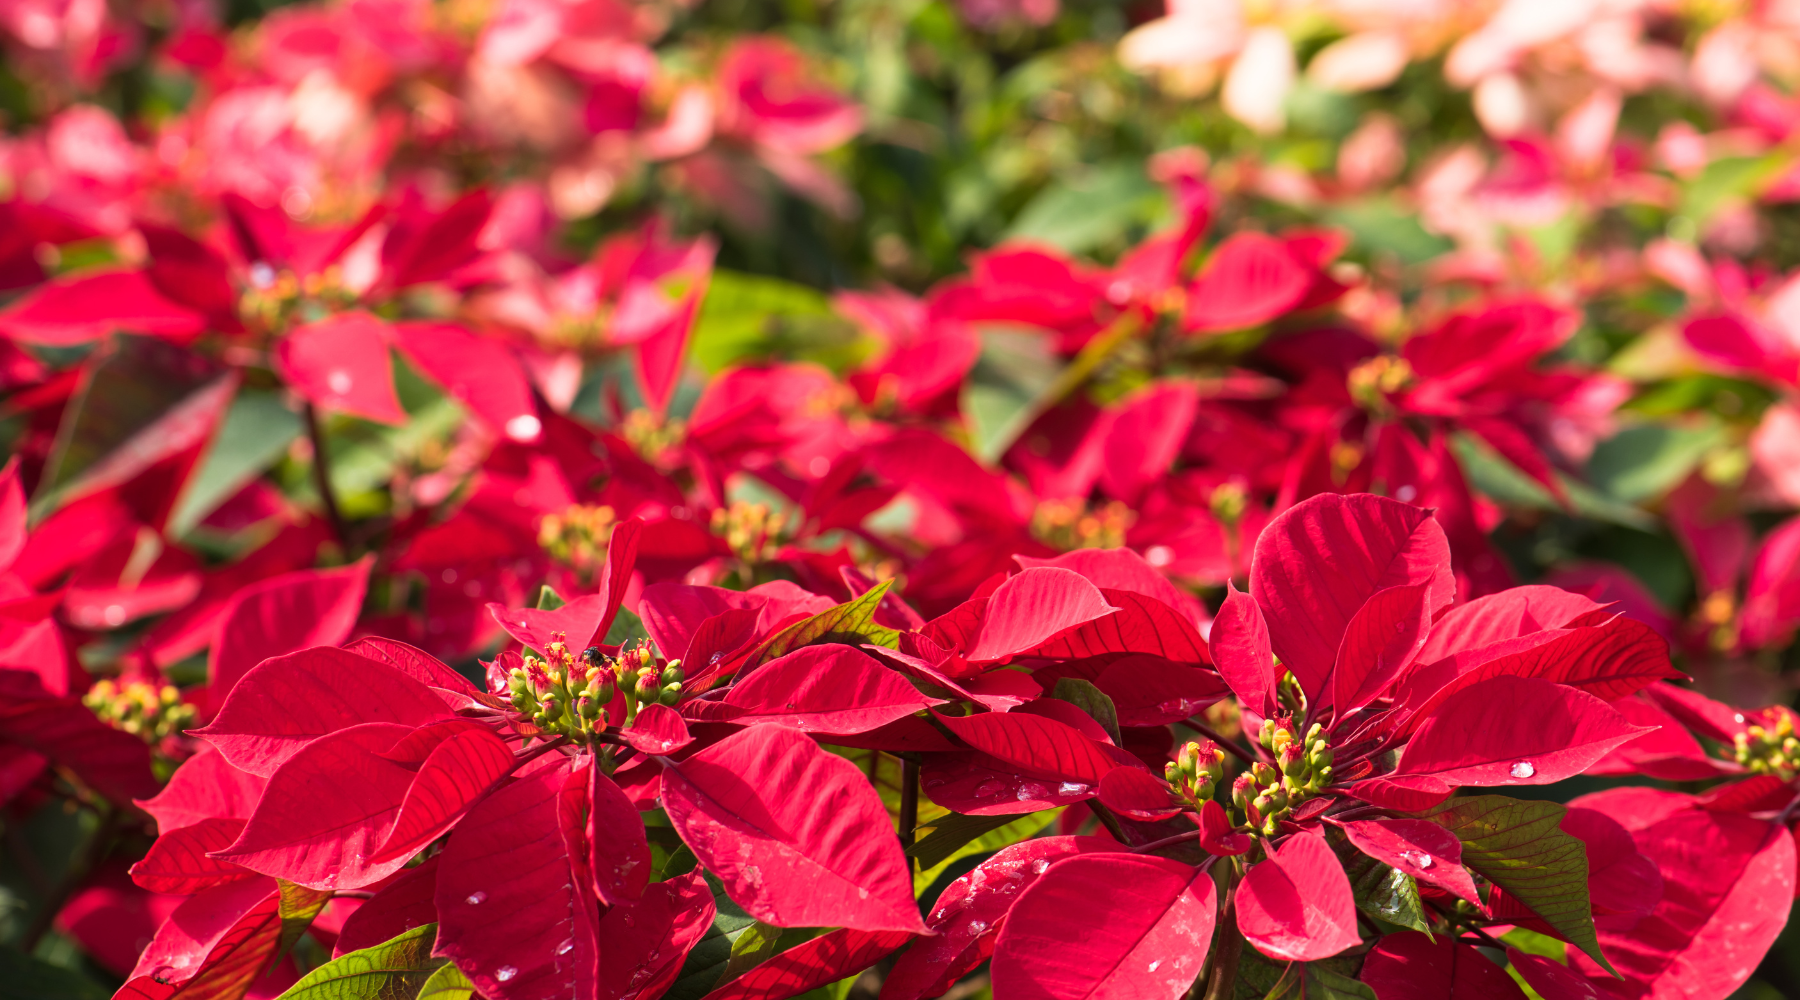 Image of red poinsettias for when to send flowers brisbane at Christmas